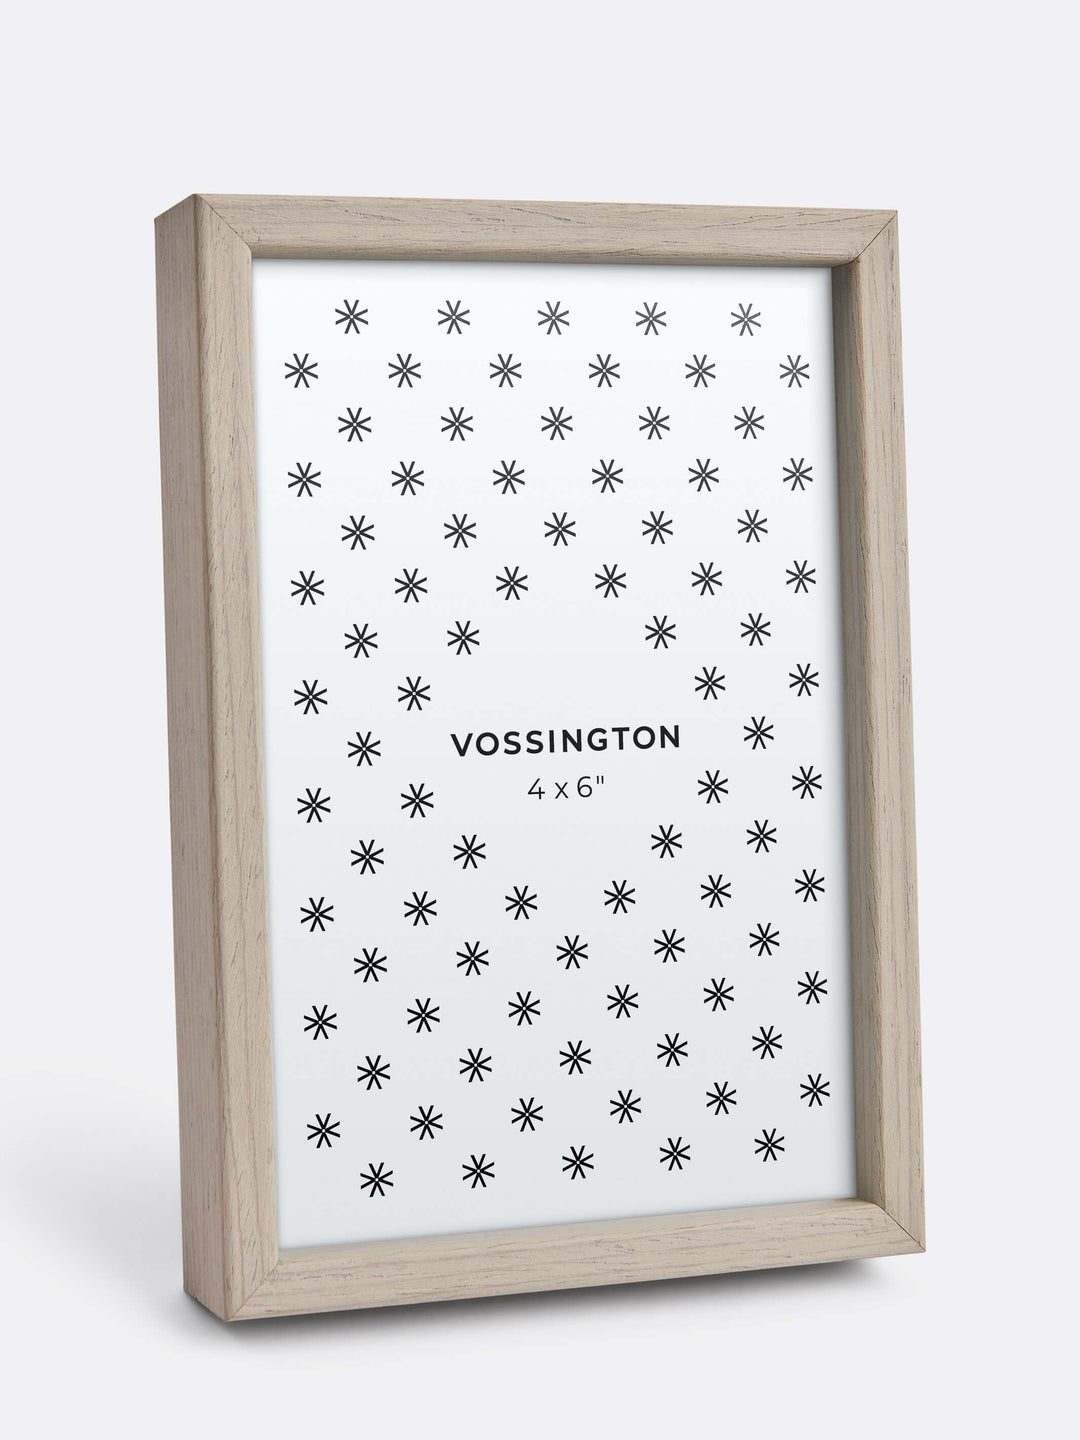 4x6 Frame - Exclusive White Wood Photo Frame From Vossington